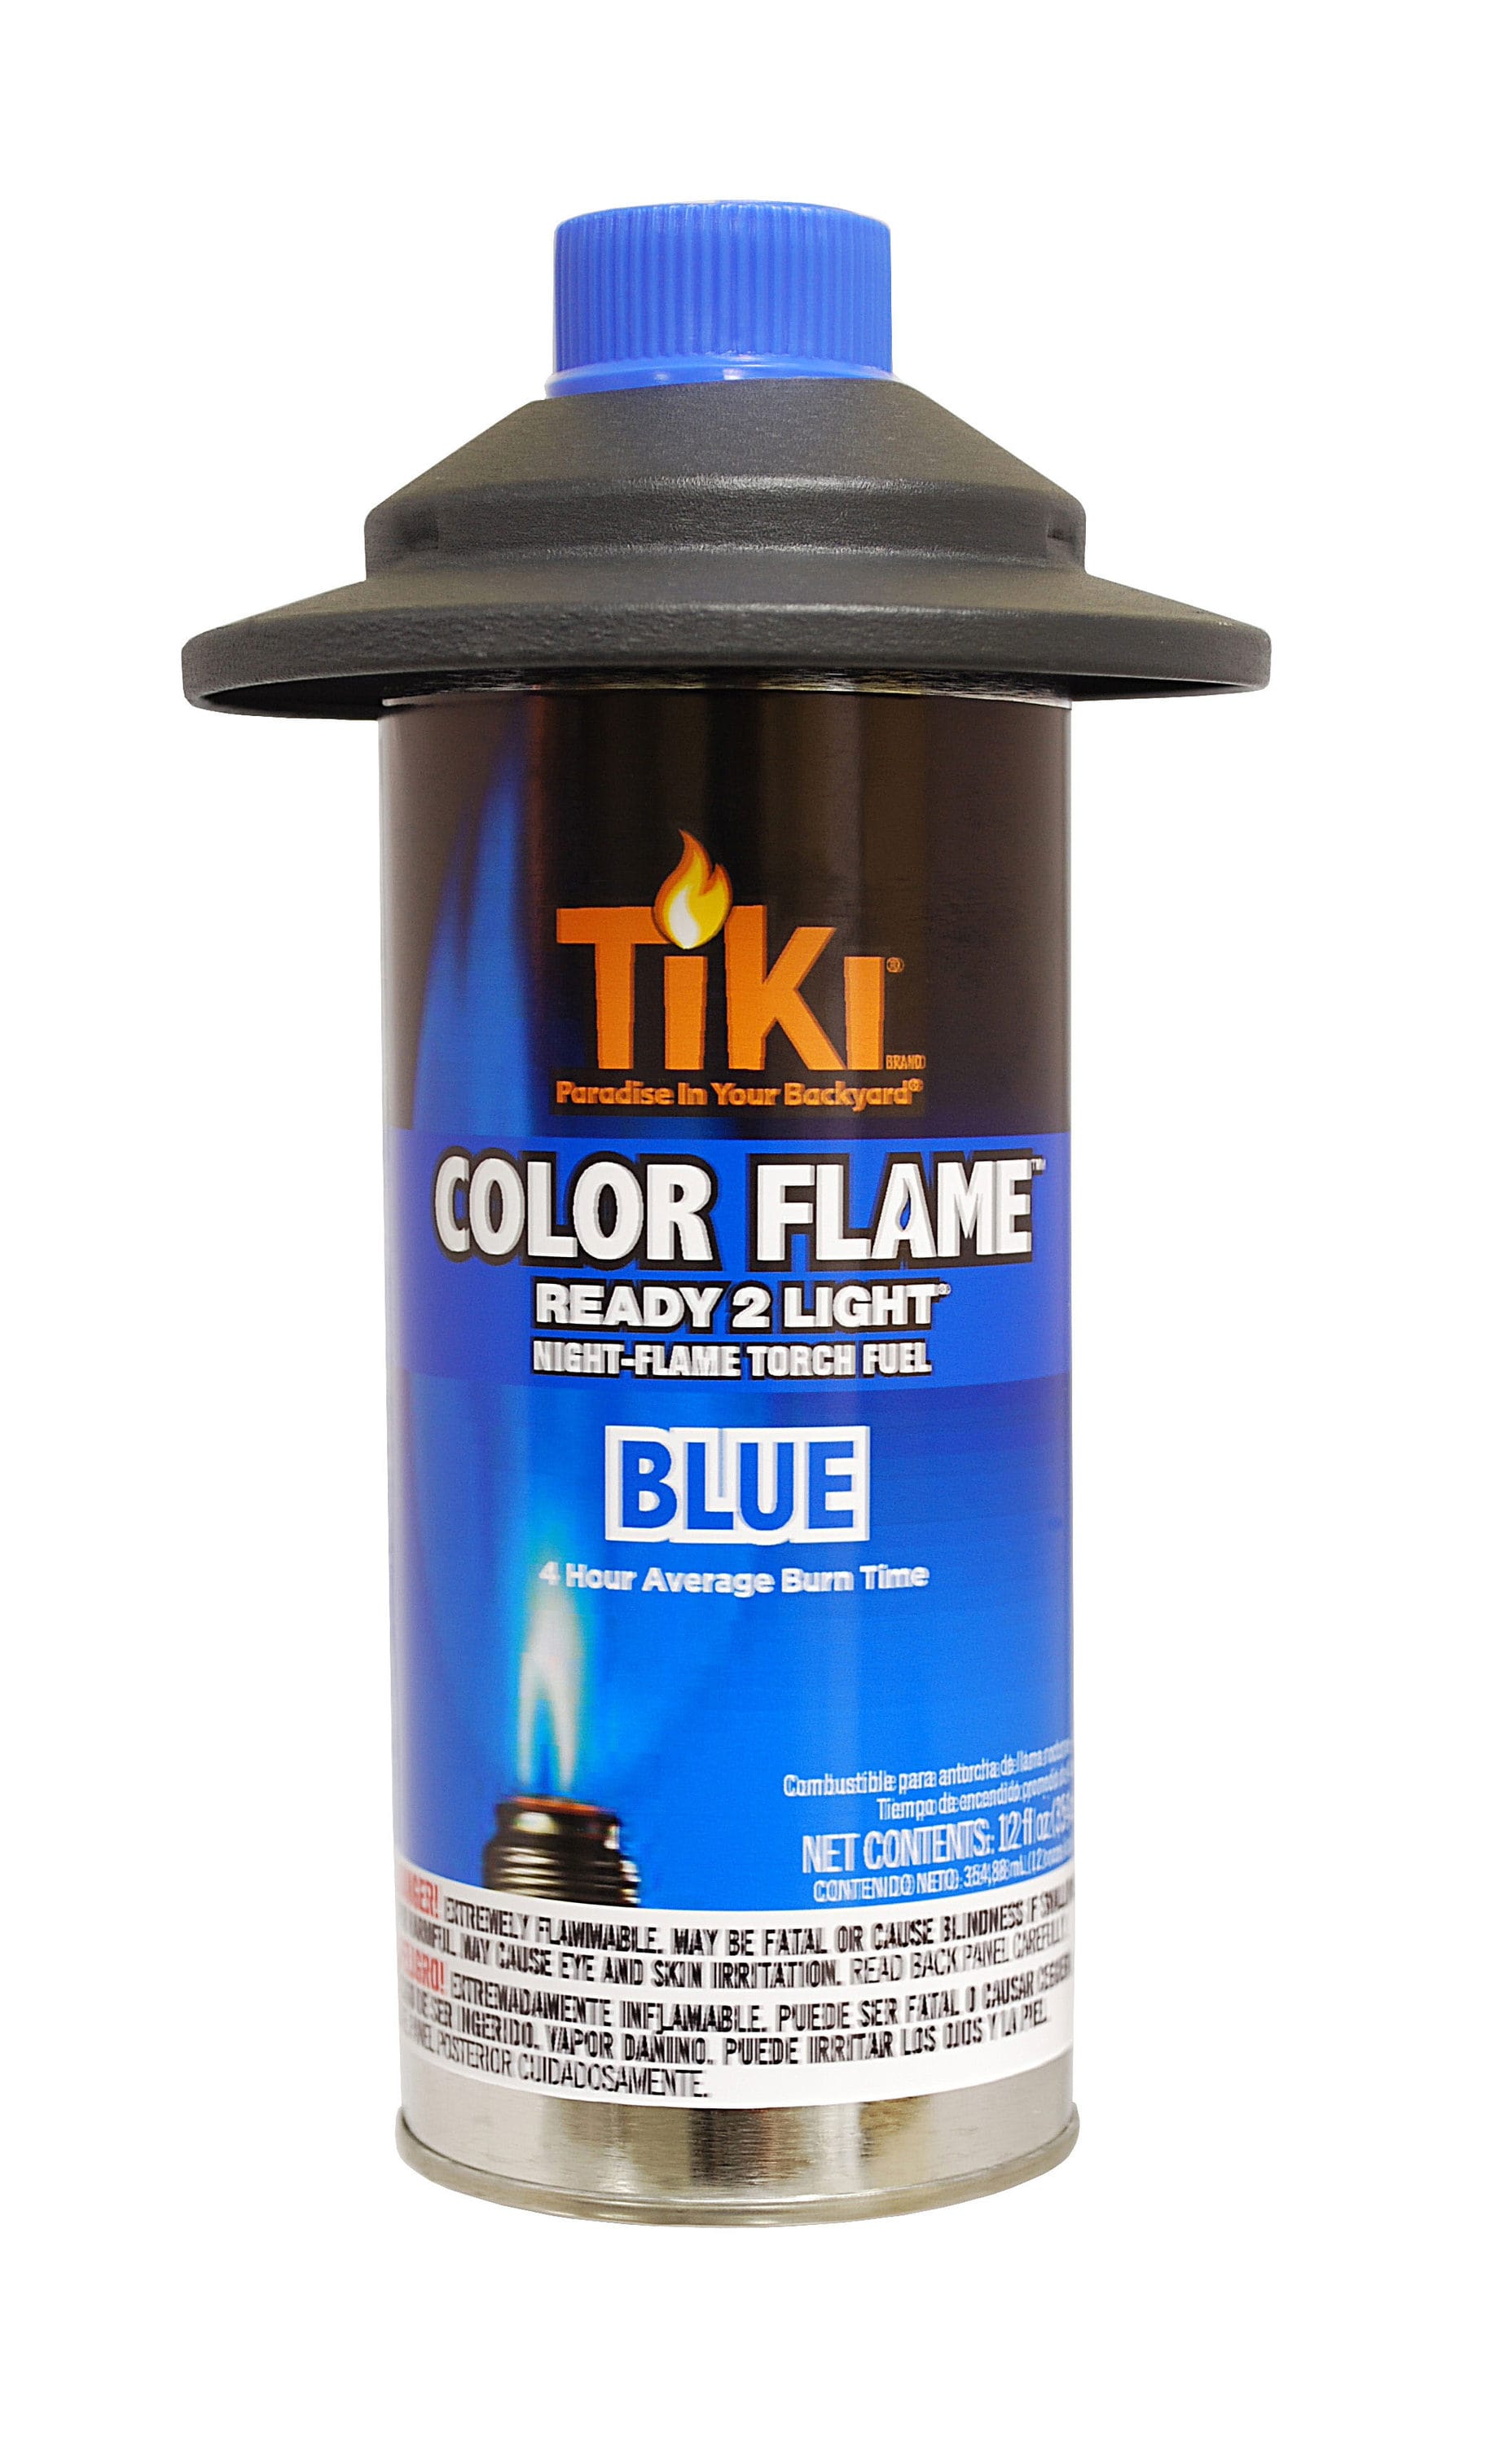 Lumina Colored Flame Liquid Fuel for Liquid Candles, Oil Lamps & Tiki  Torches 